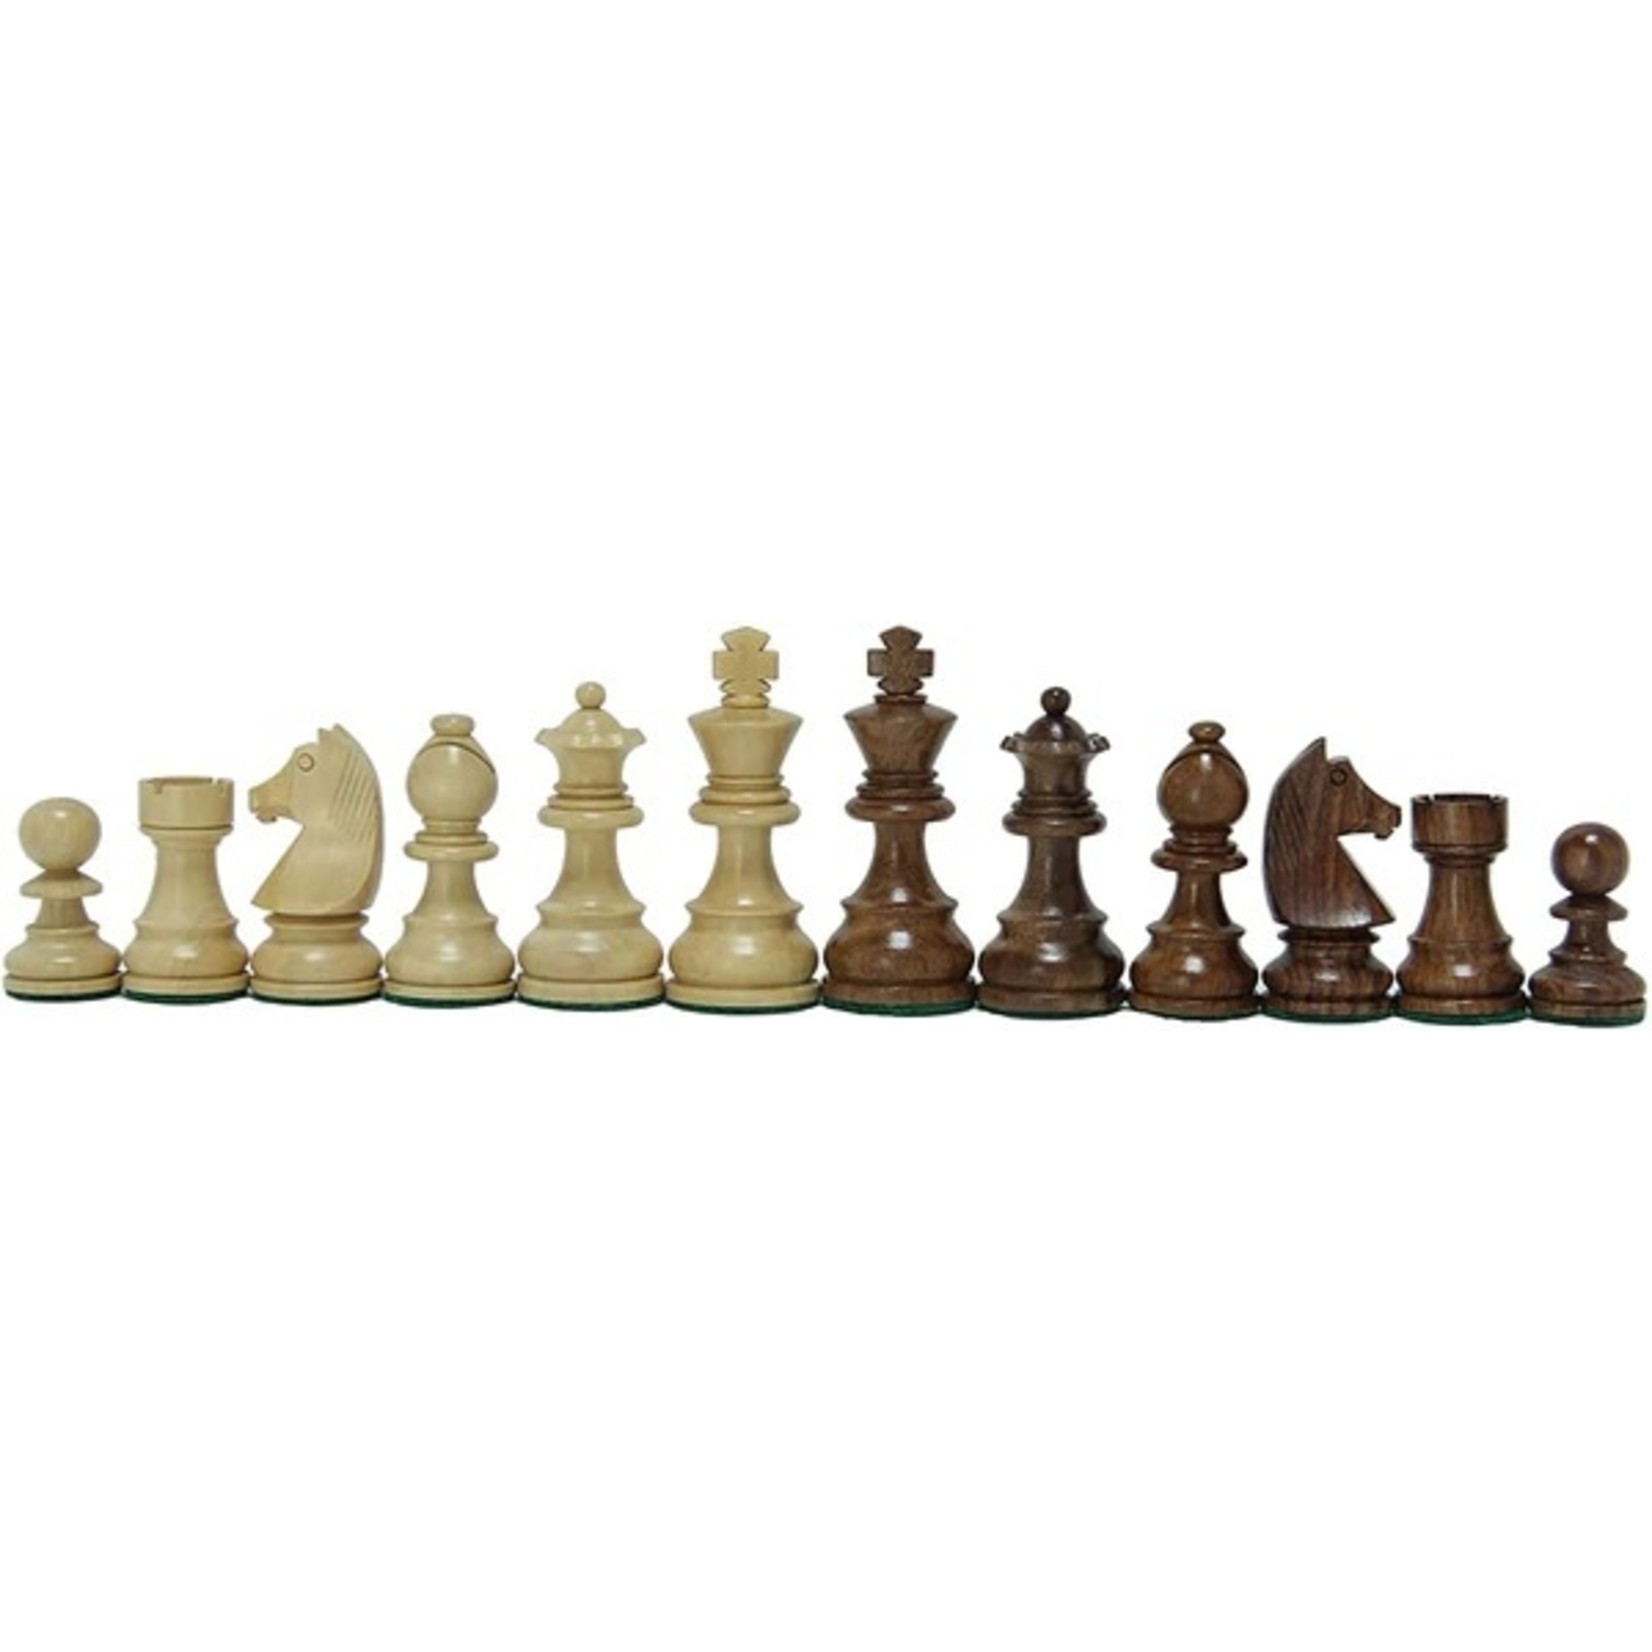 Wood Expressions Magnetic Folding Chess & Checkers Set – Walnut Wood Finish 8 inch